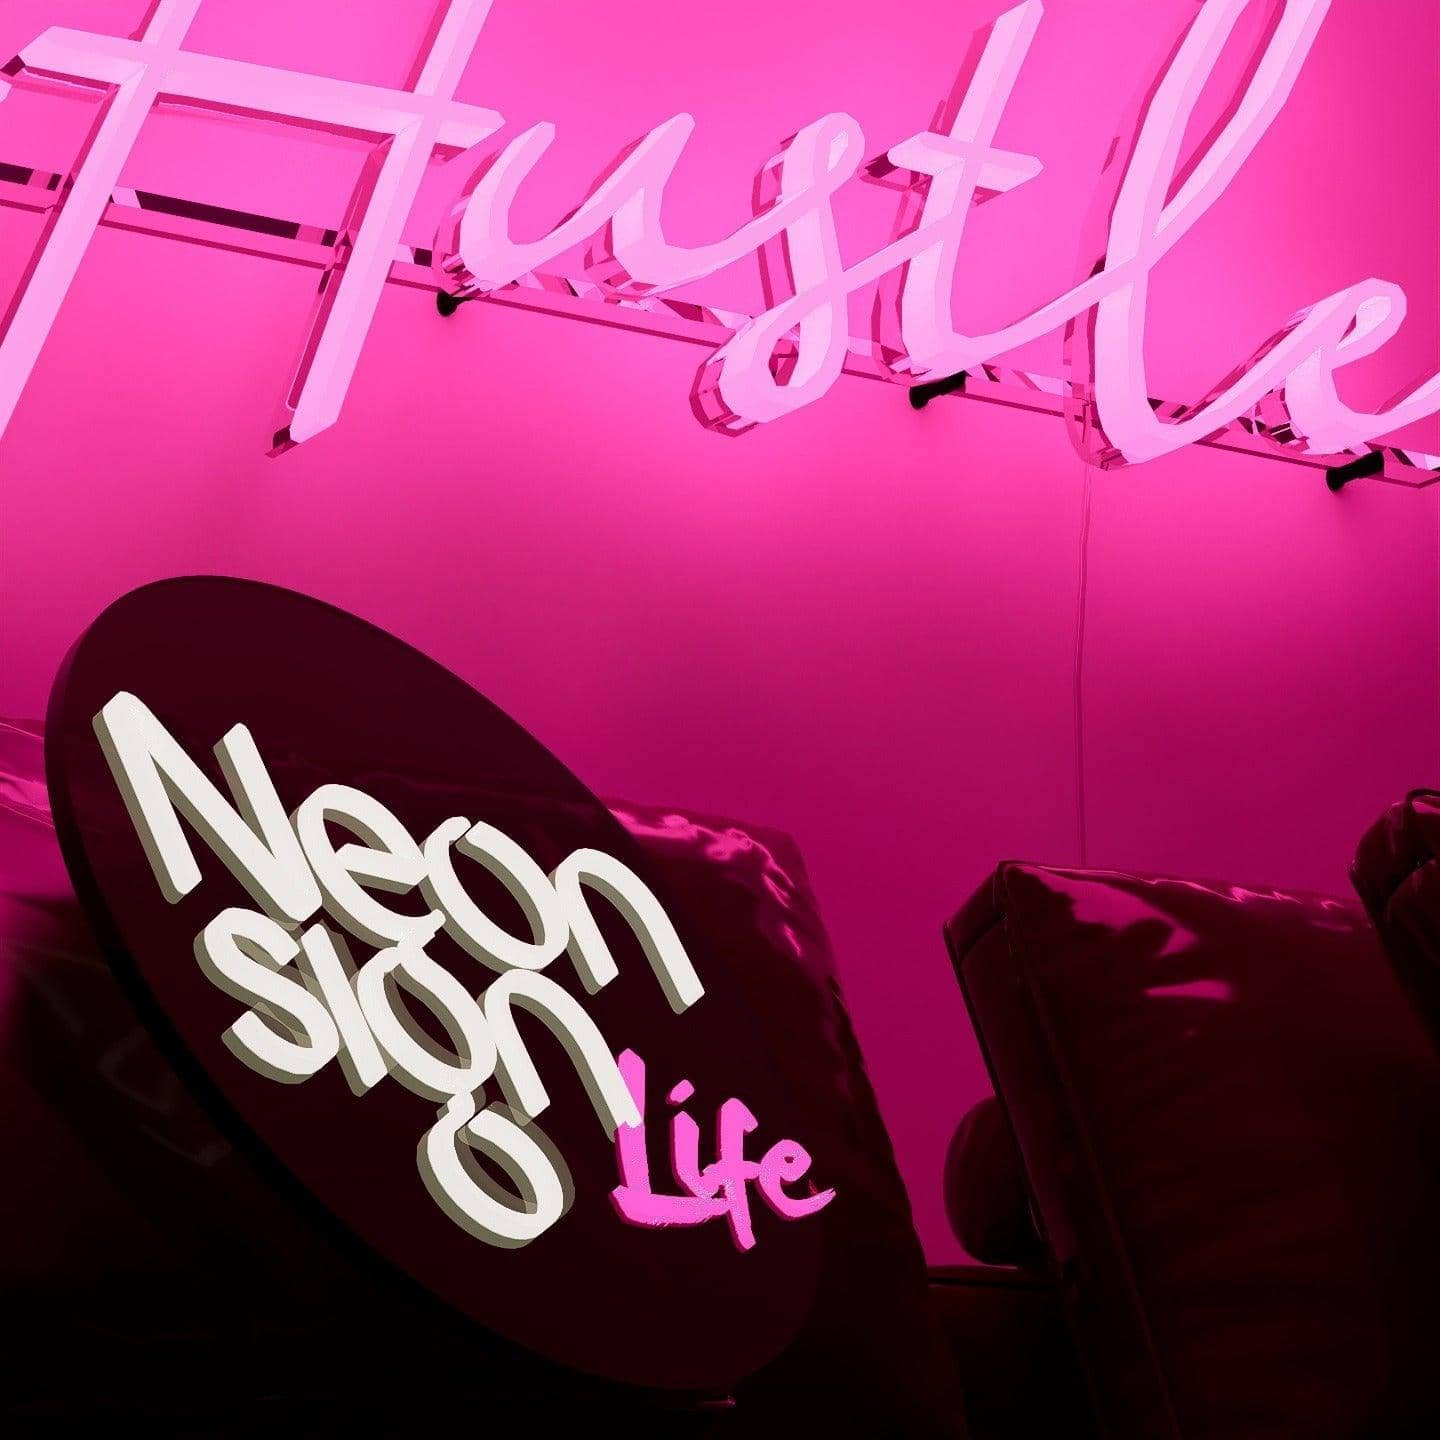 night-shot-of-lit-pink-neon-lights-hanging-on-the-wall-for-display-hustle